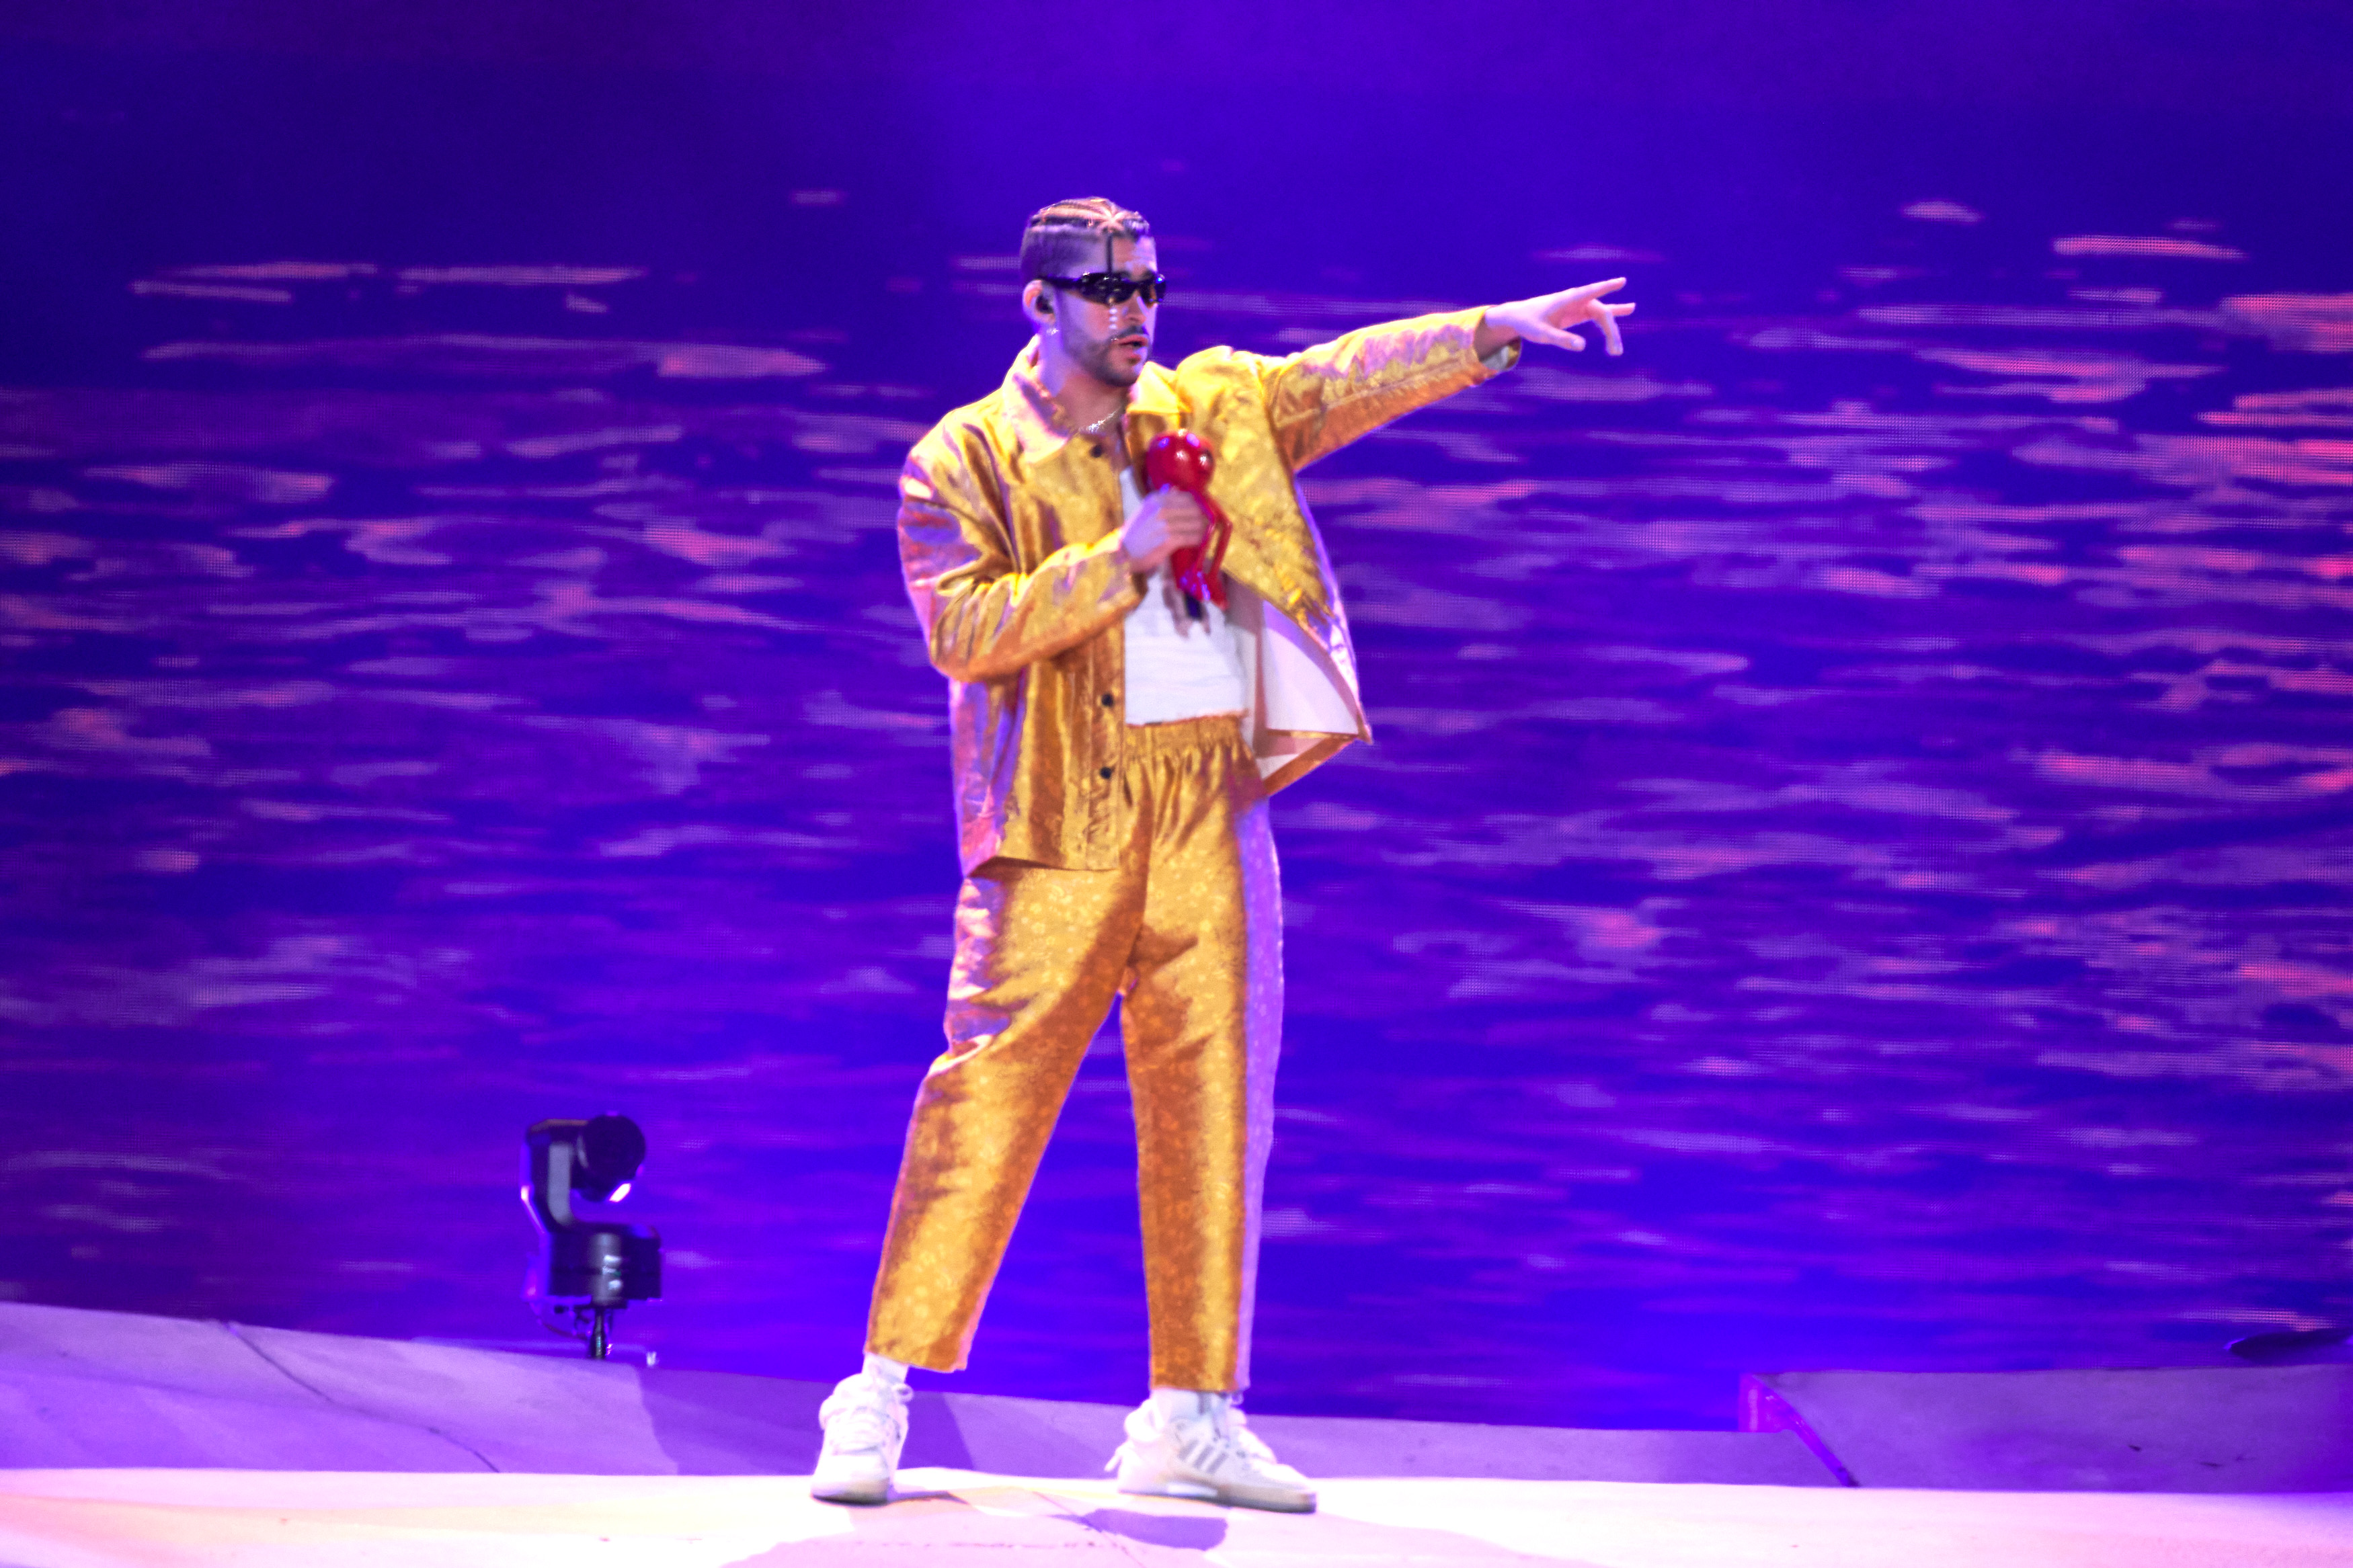 Entertainer Bad Bunny, right, attends during the first half of an